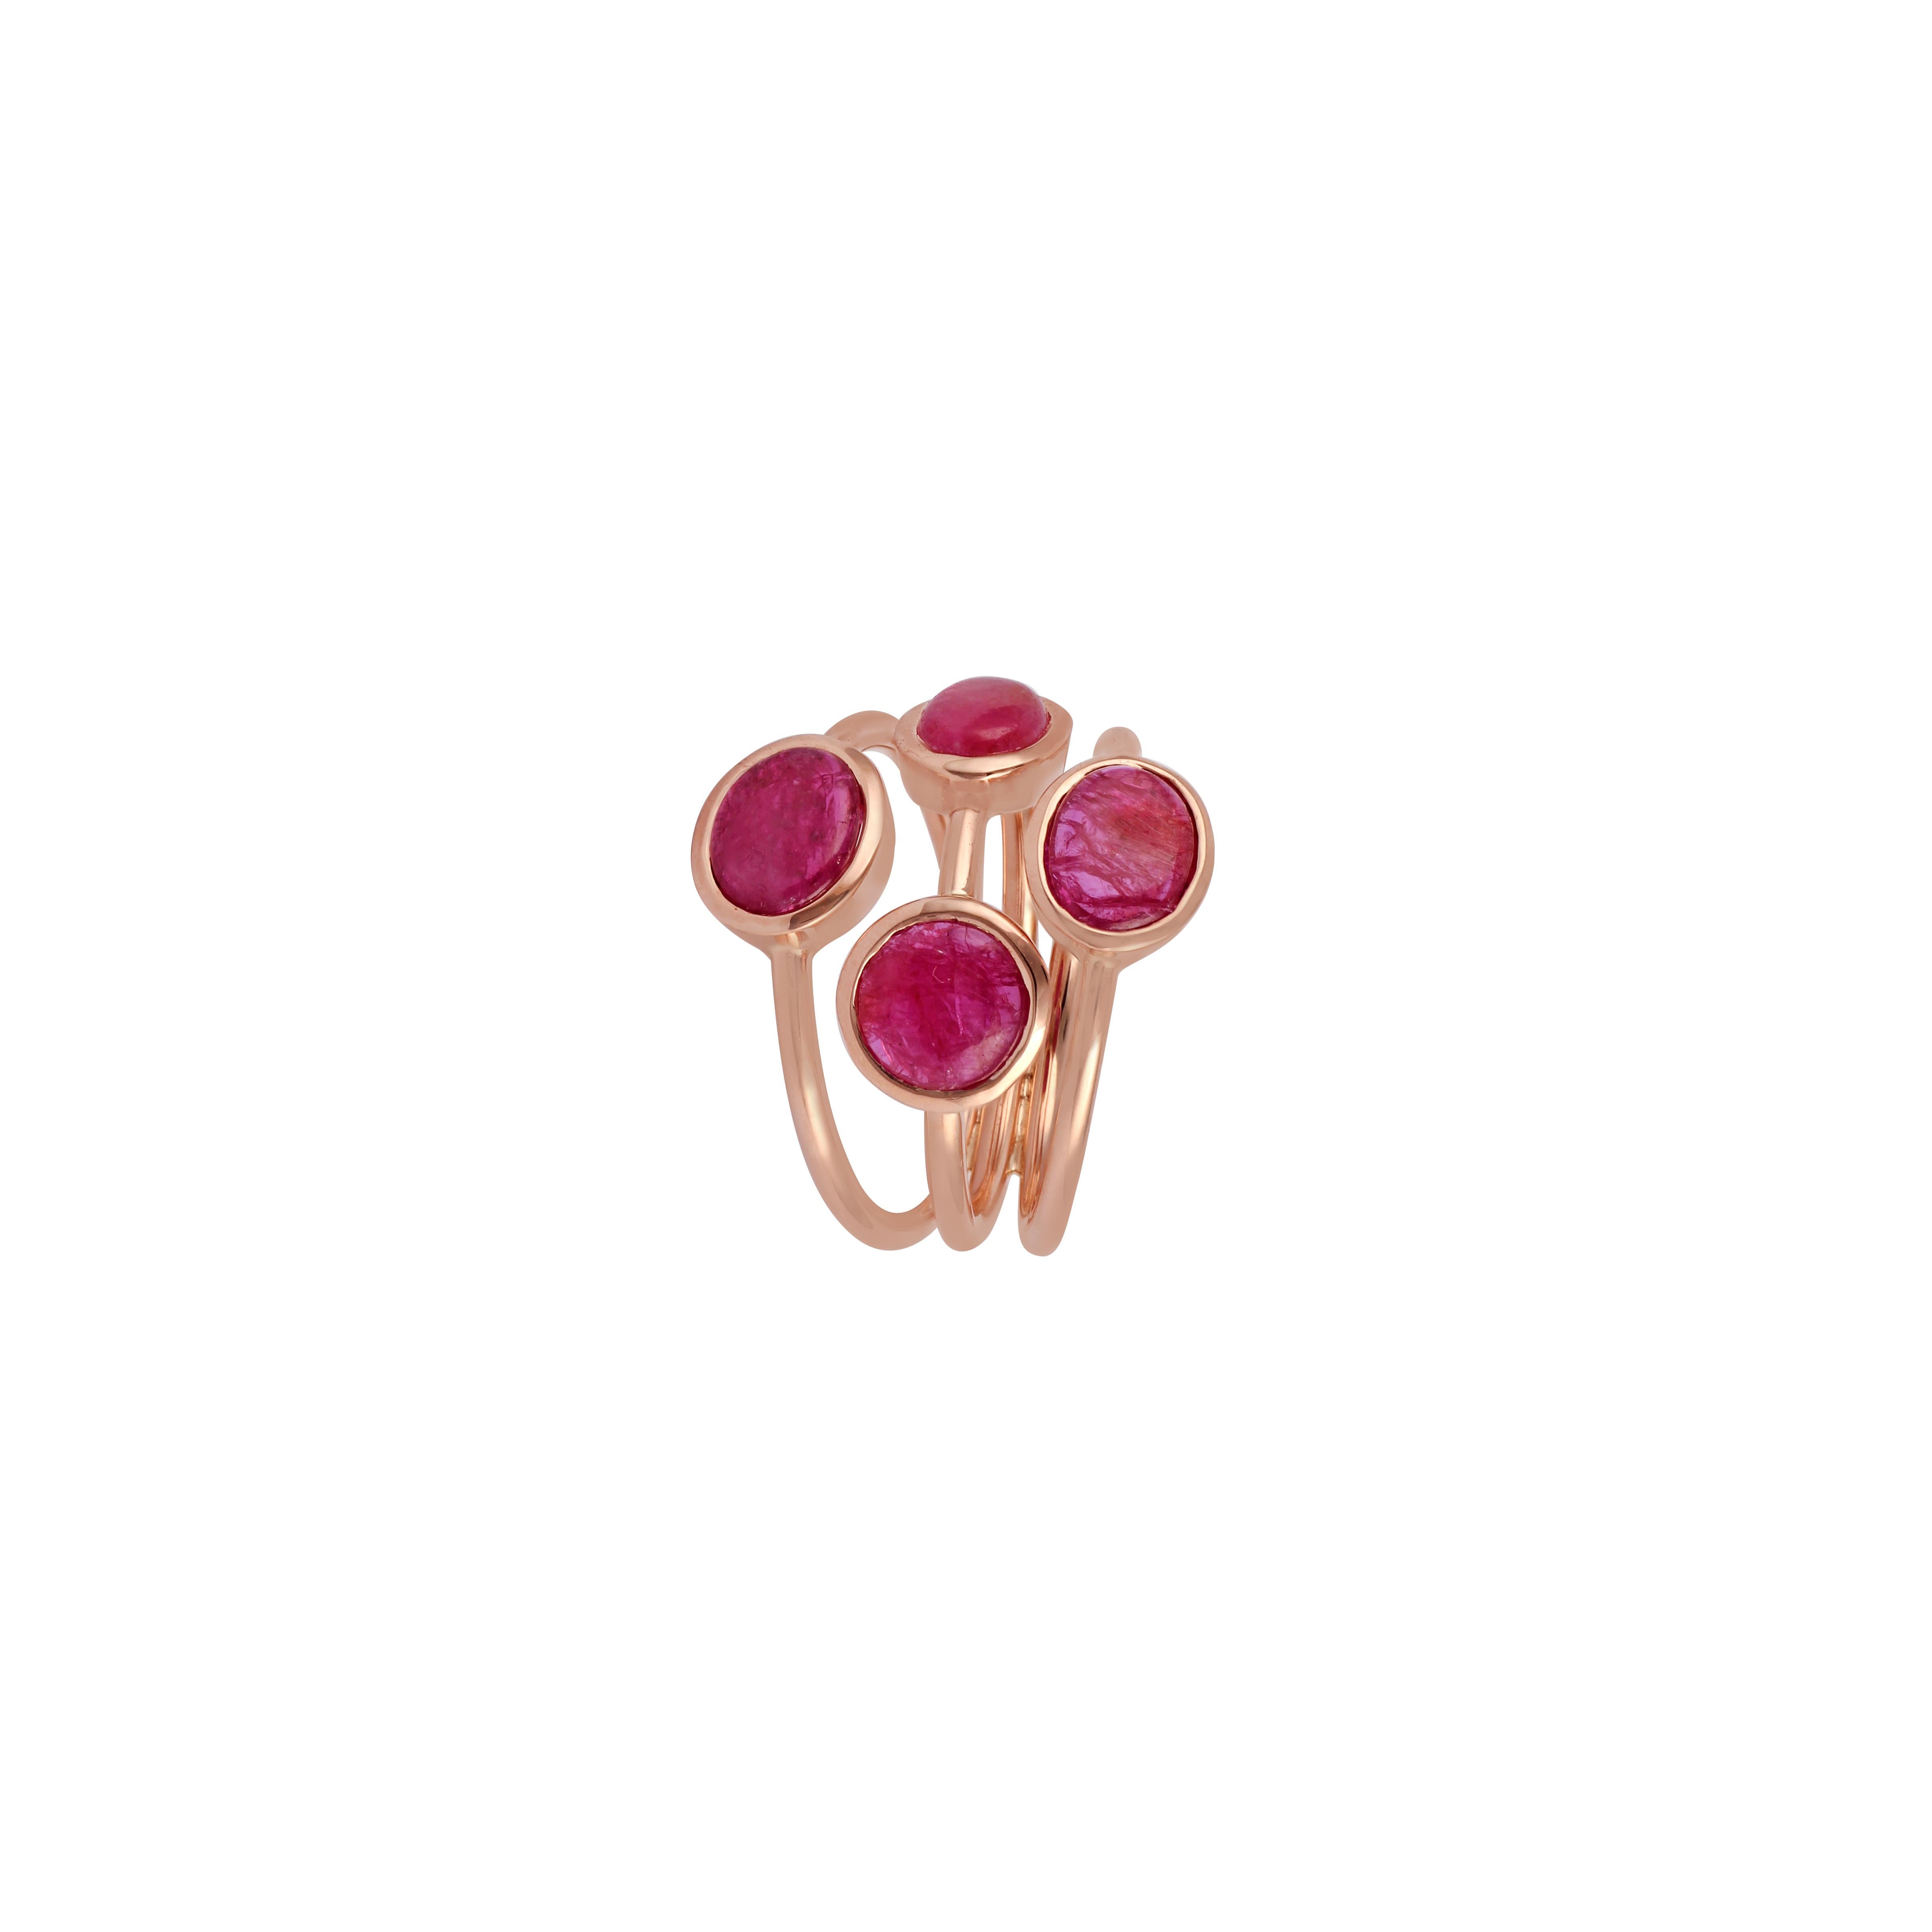 Cabochon Ruby Ring Studded in 18k Rose Gold For Sale